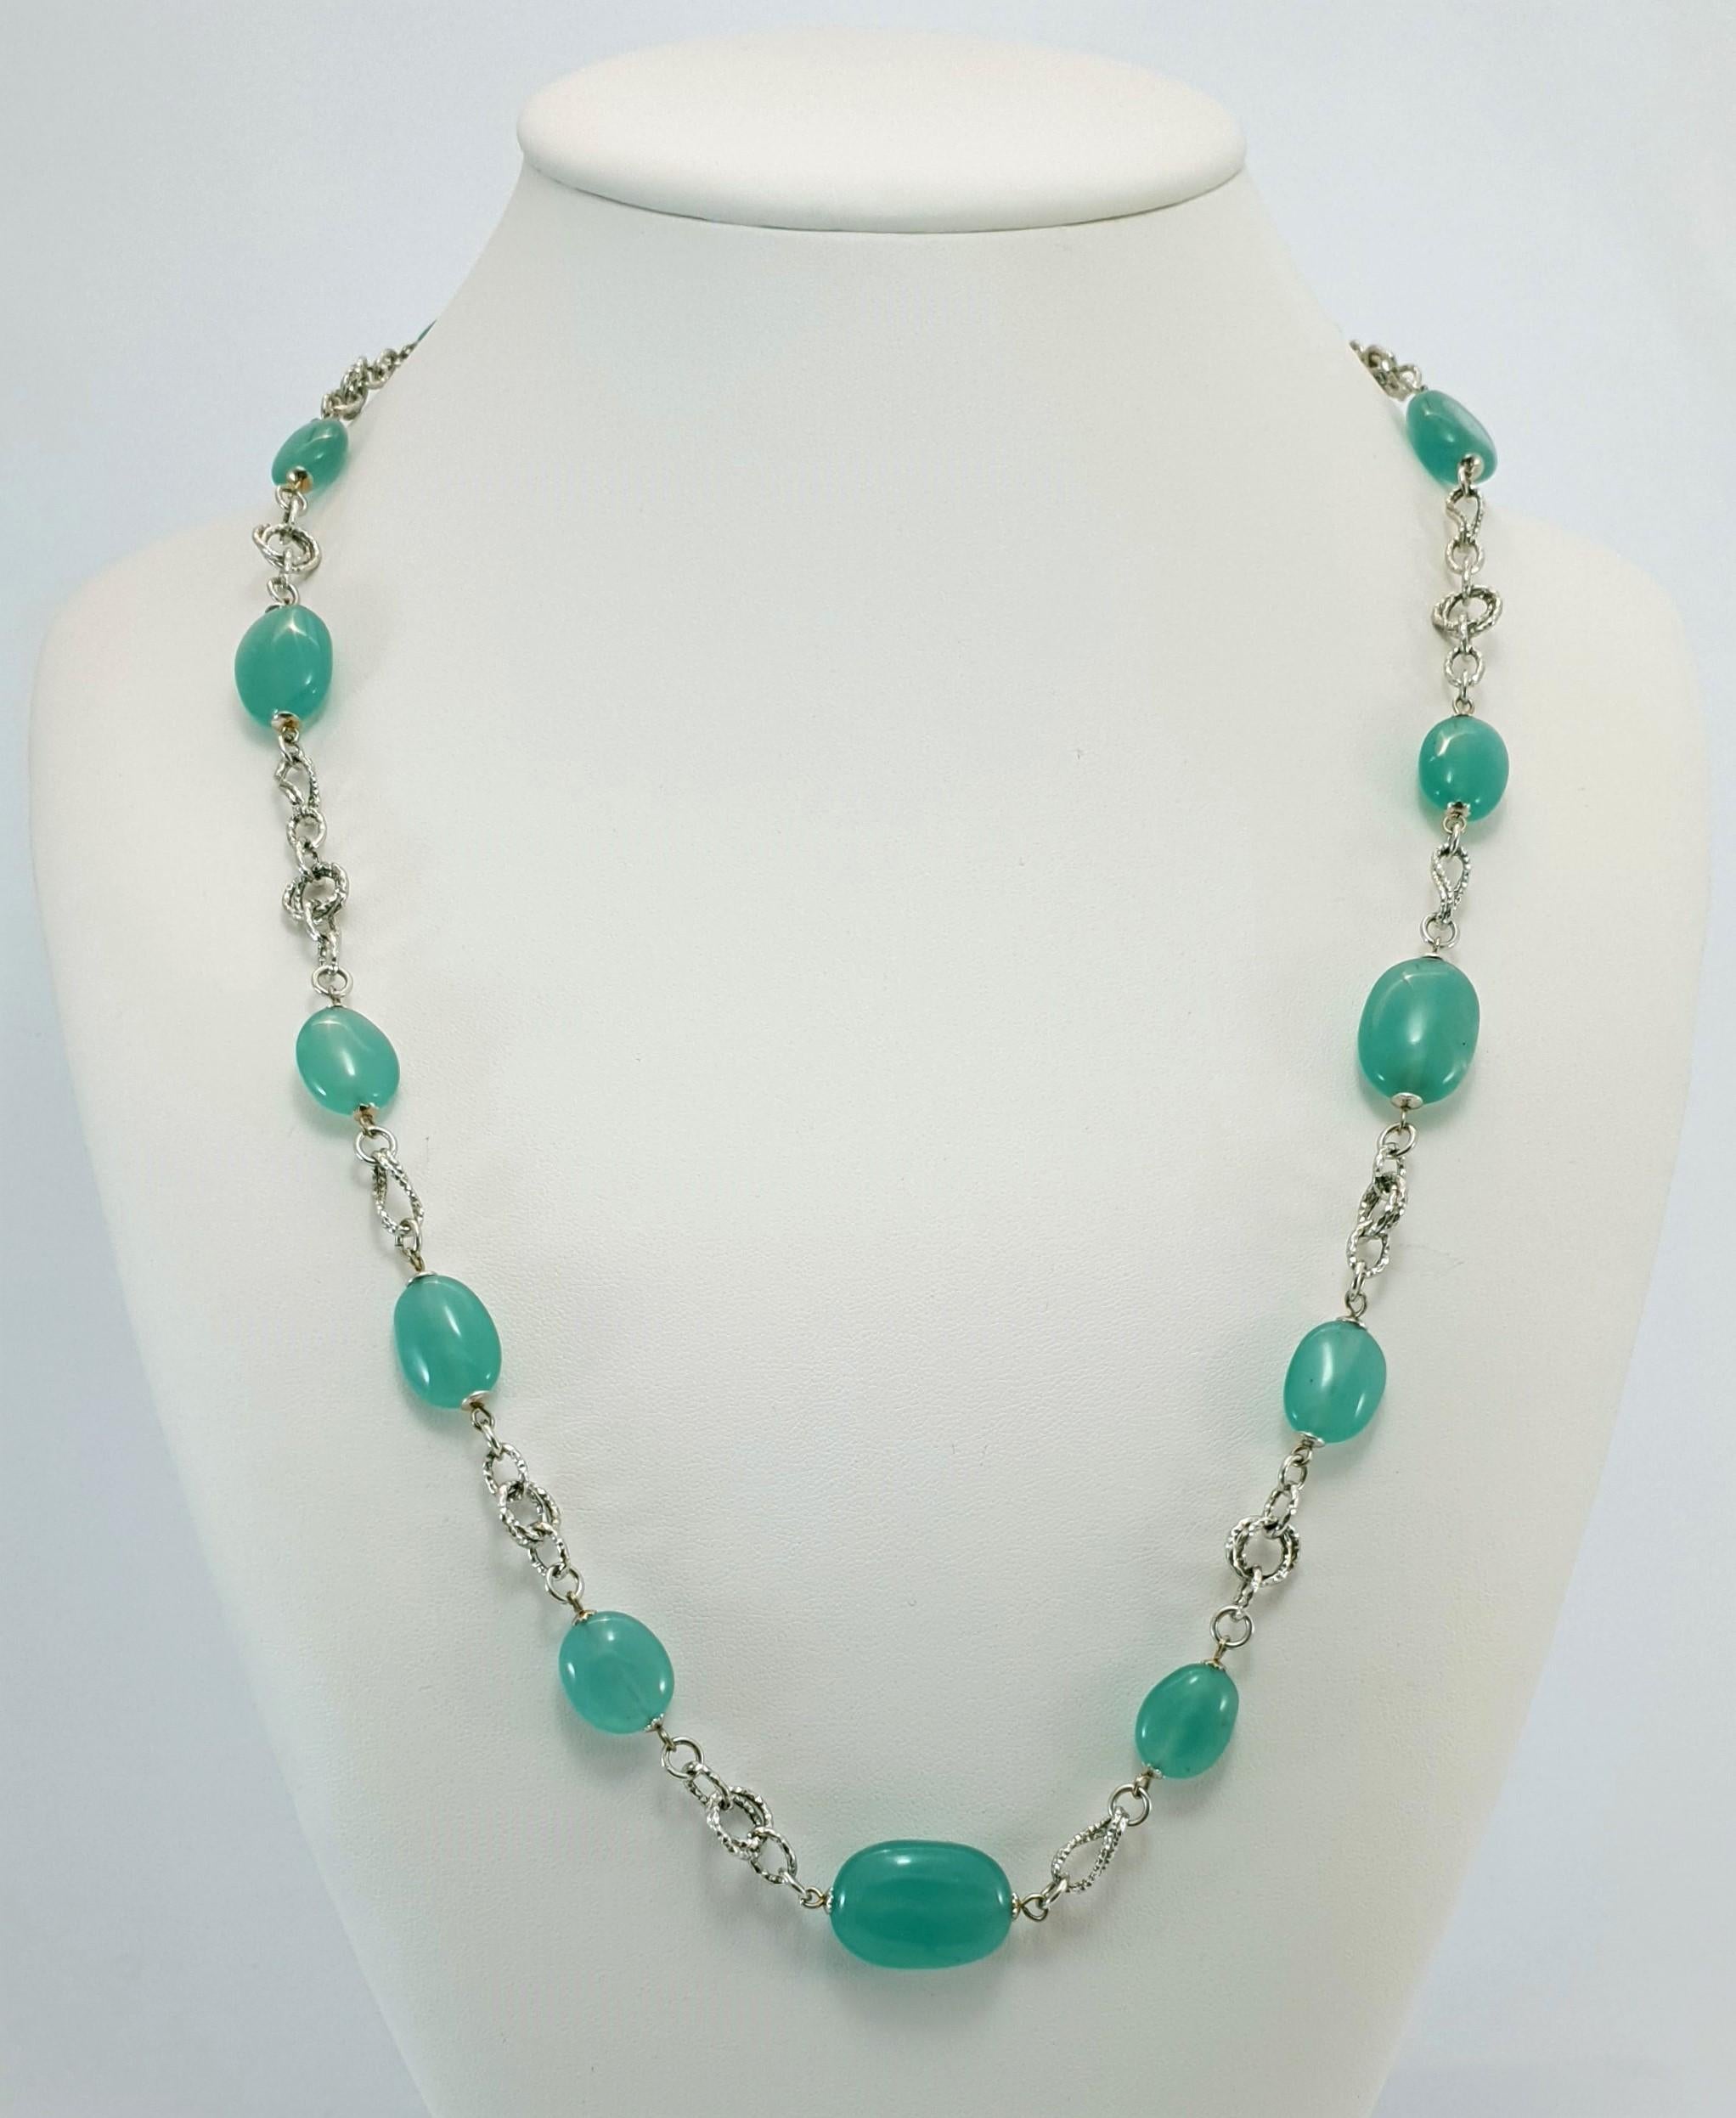 Green Chalcedony Baroque Bead Necklace with 18 Carat White Gold For Sale 5